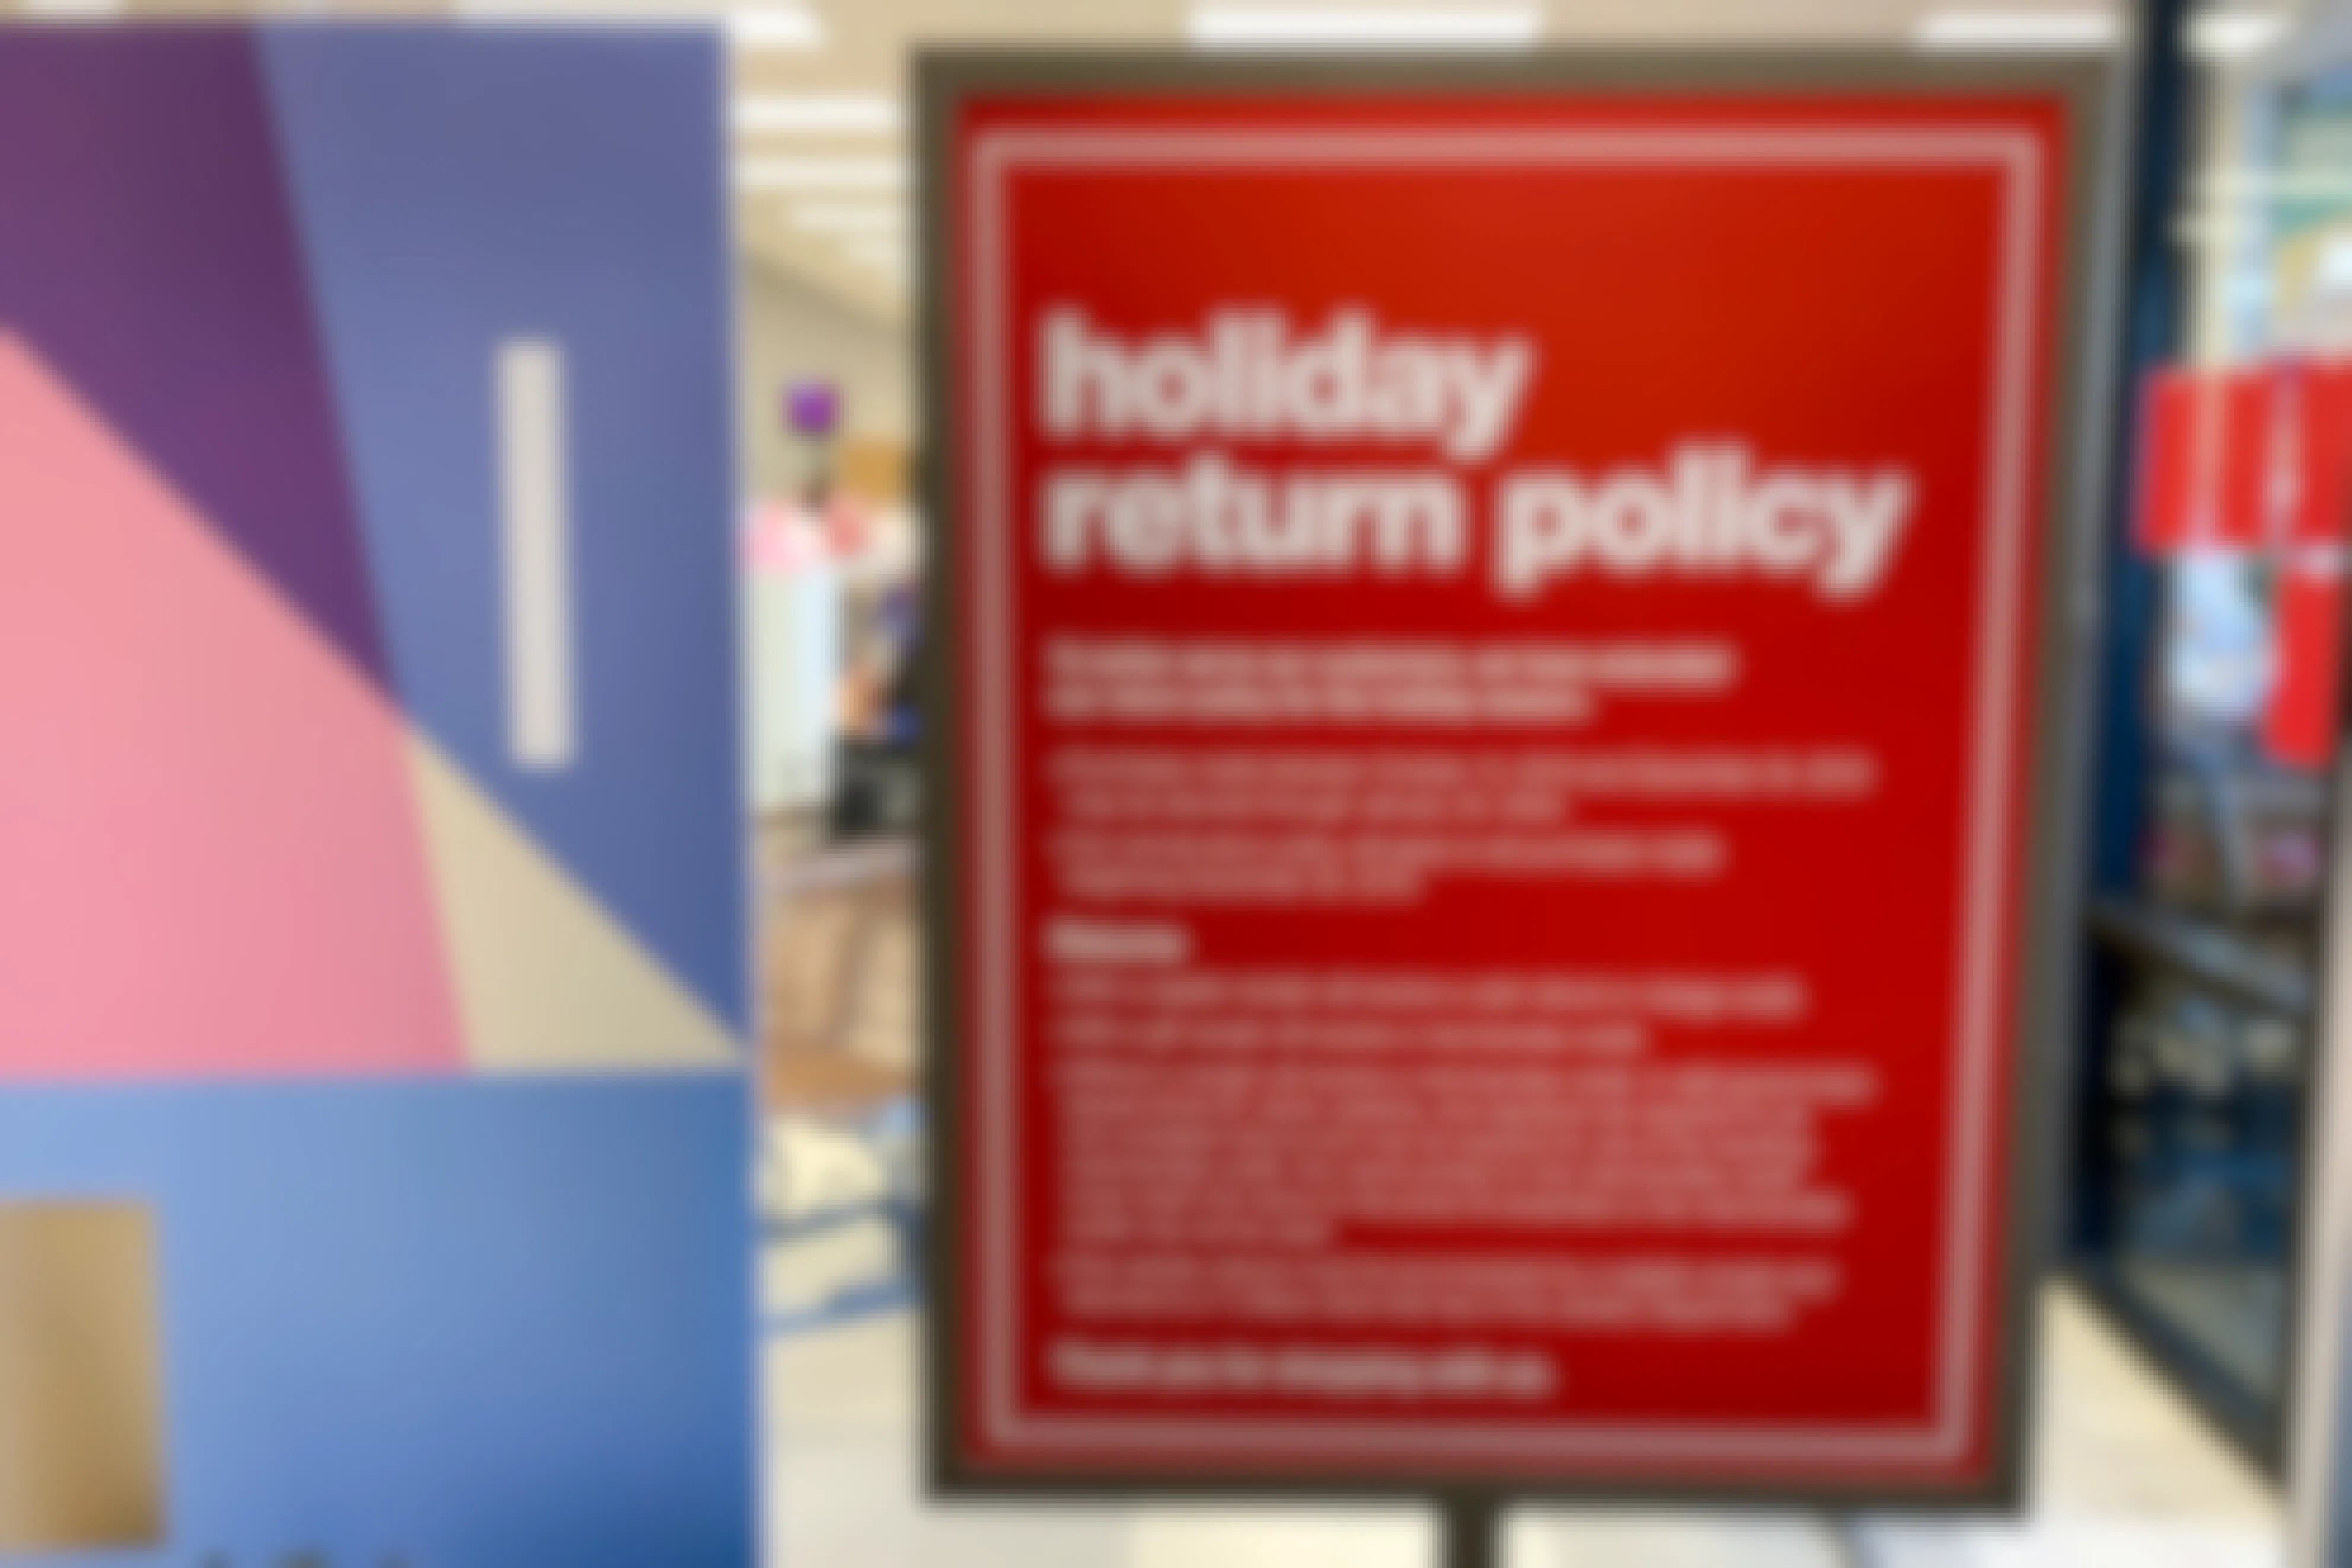 The holiday return policy sign at the front entrance.